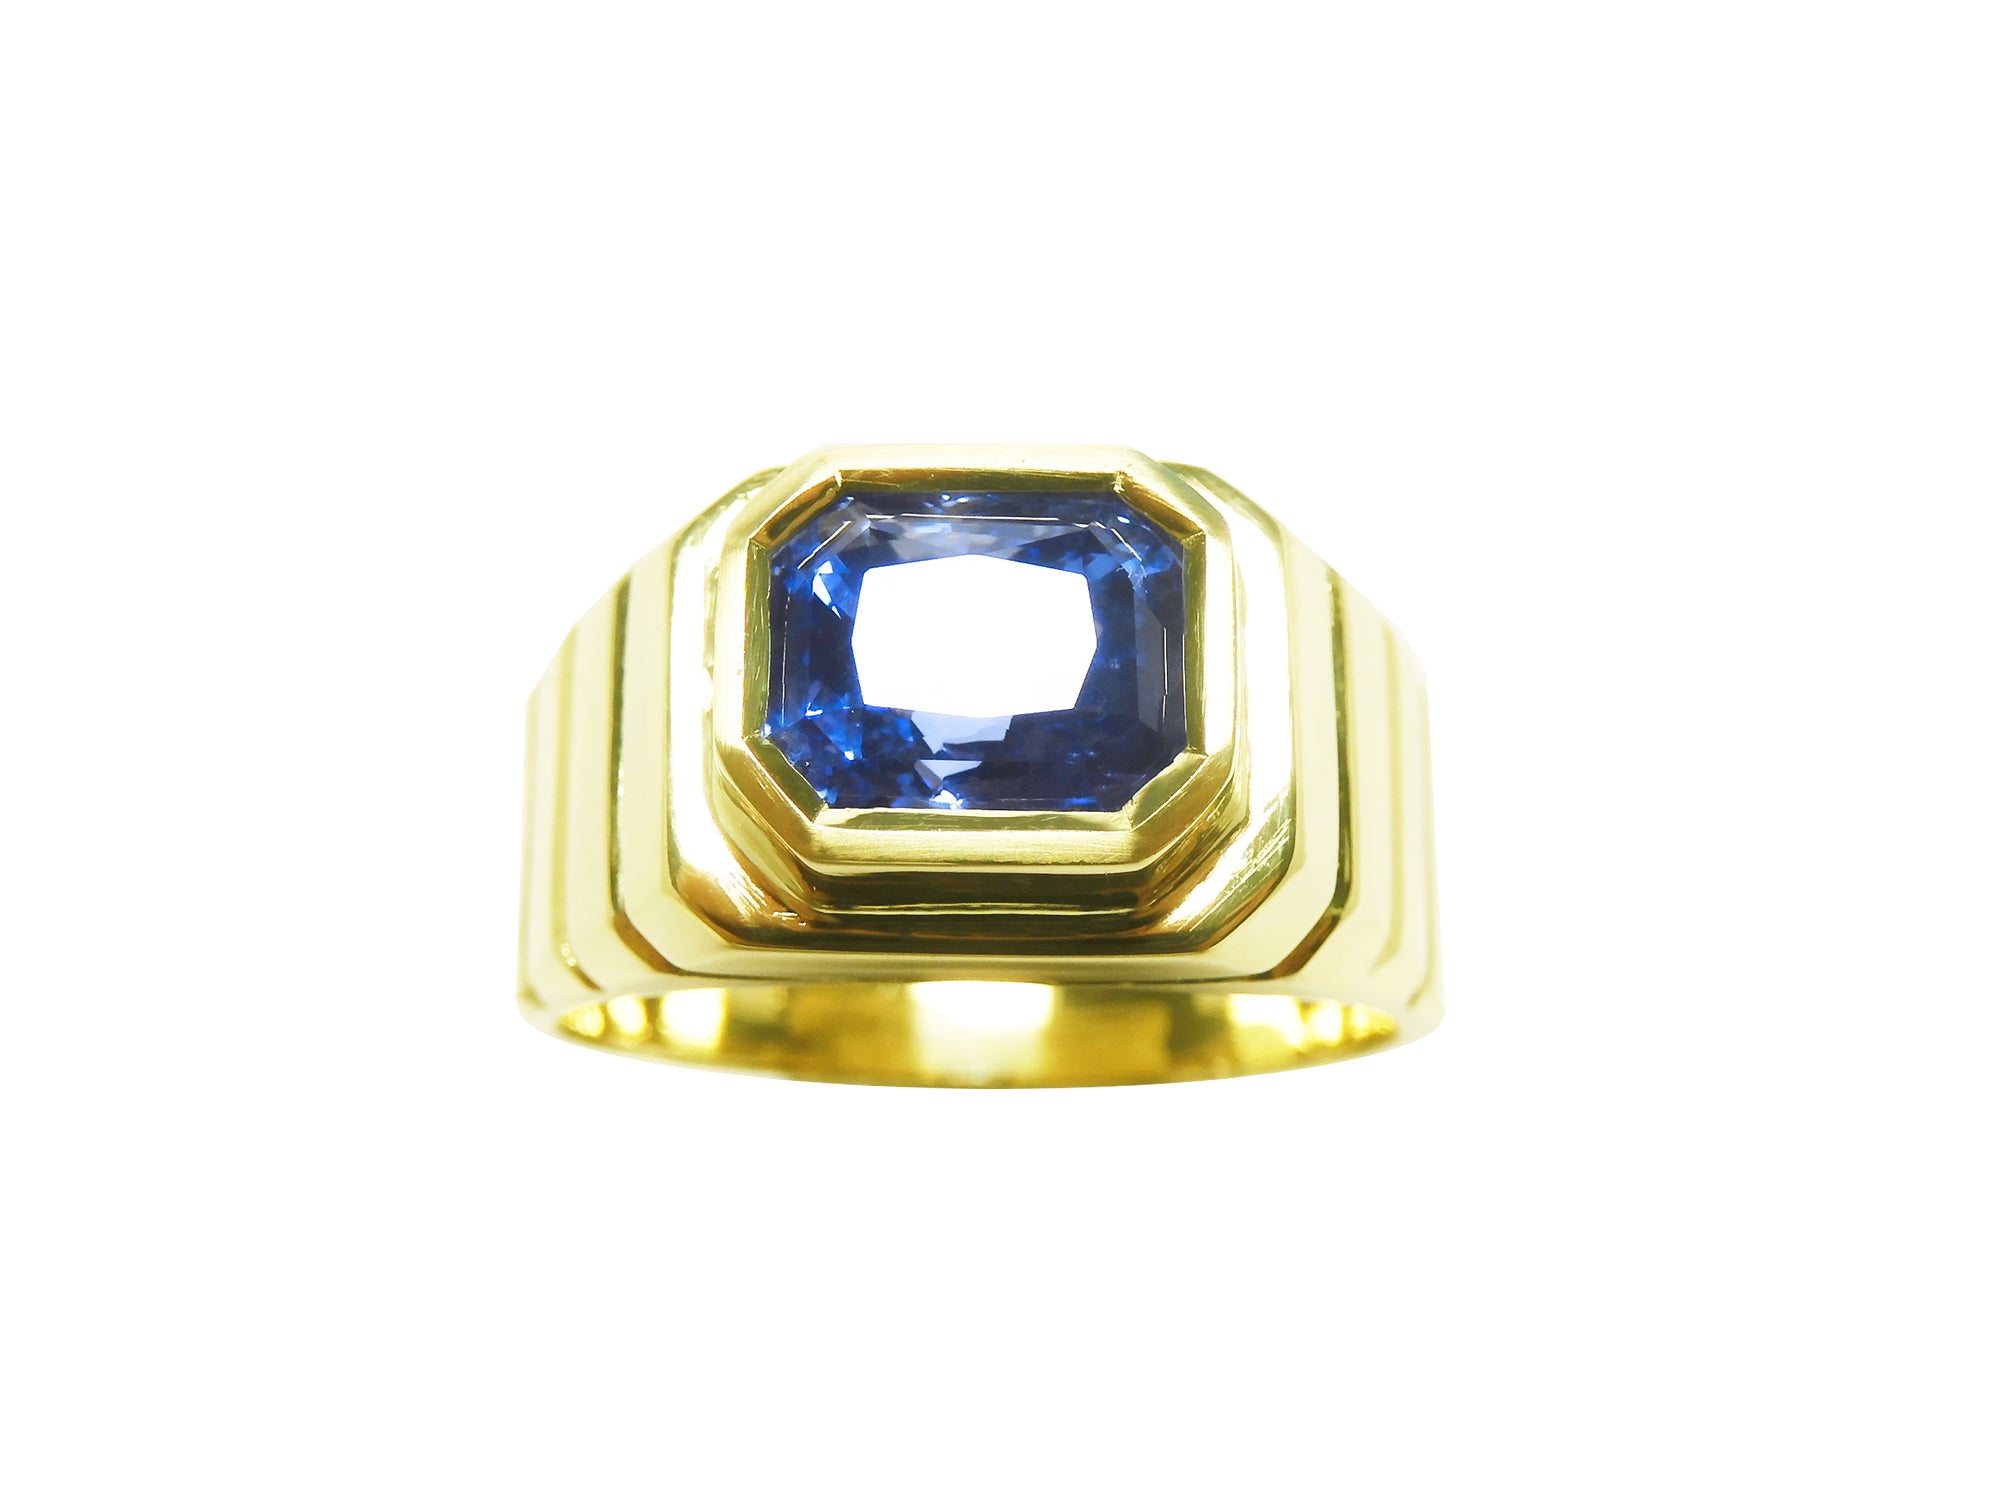 Gold and sapphire ring for father’s day